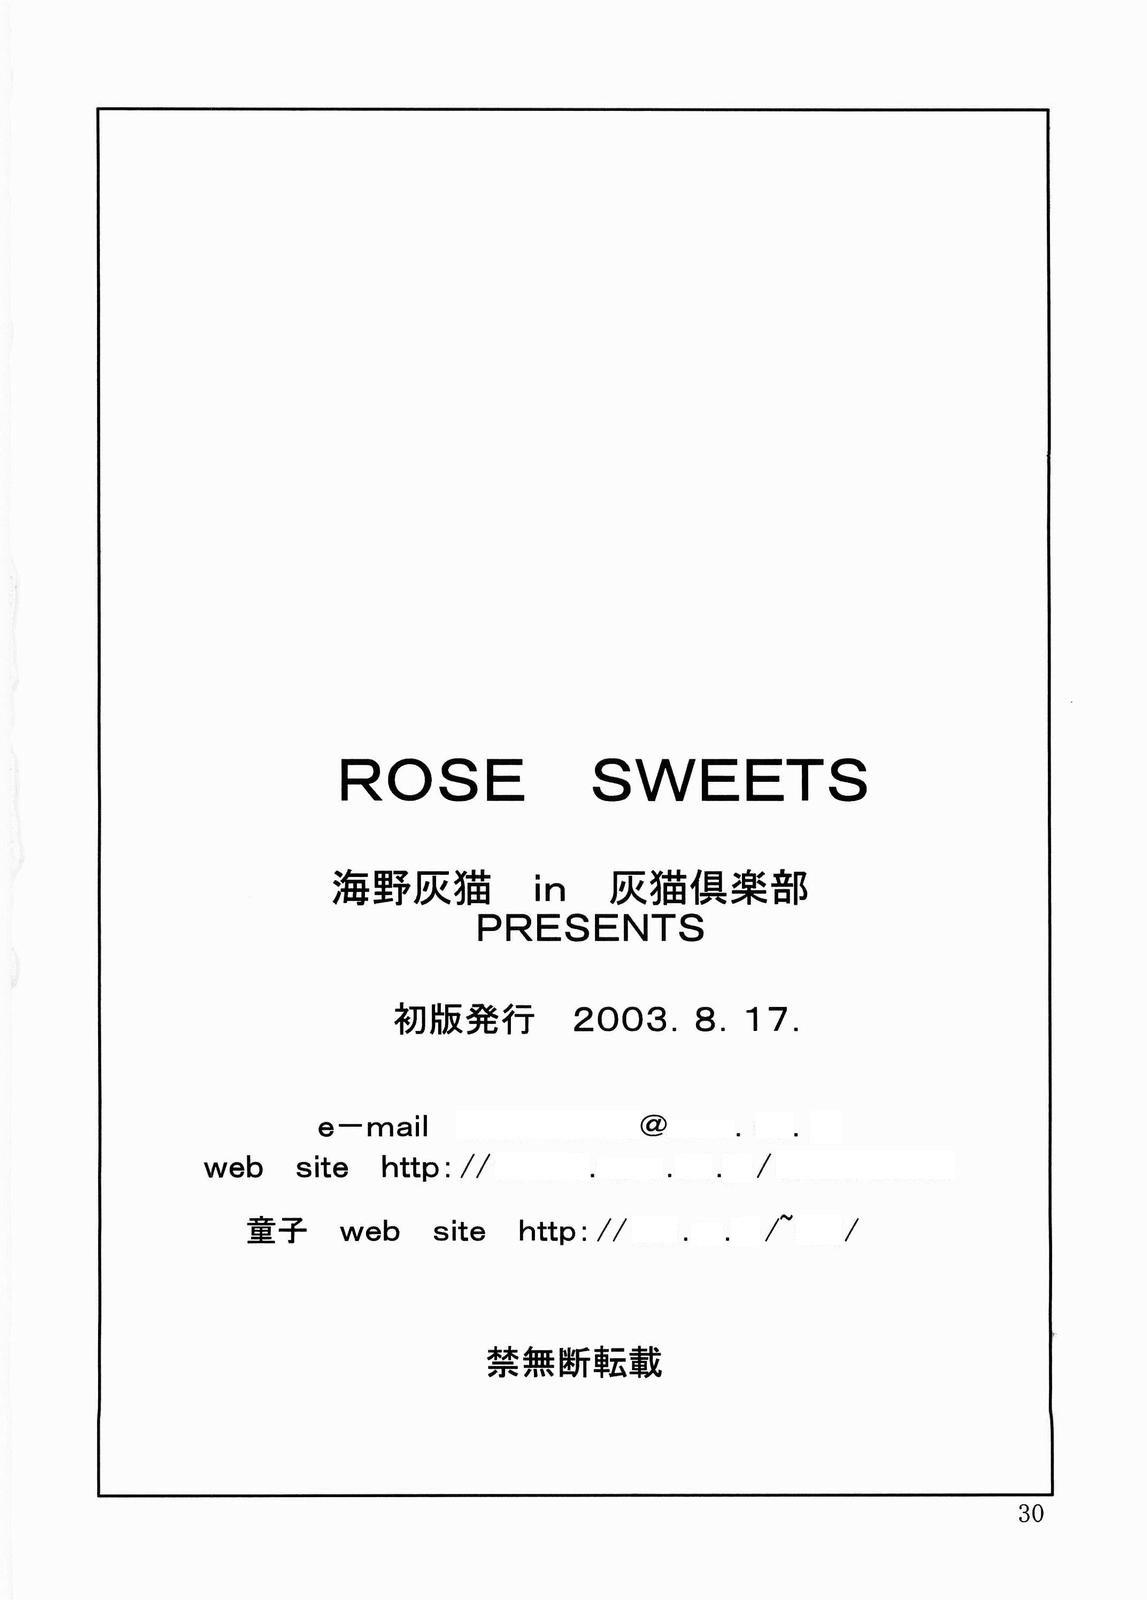 ROSE SWEETS 28